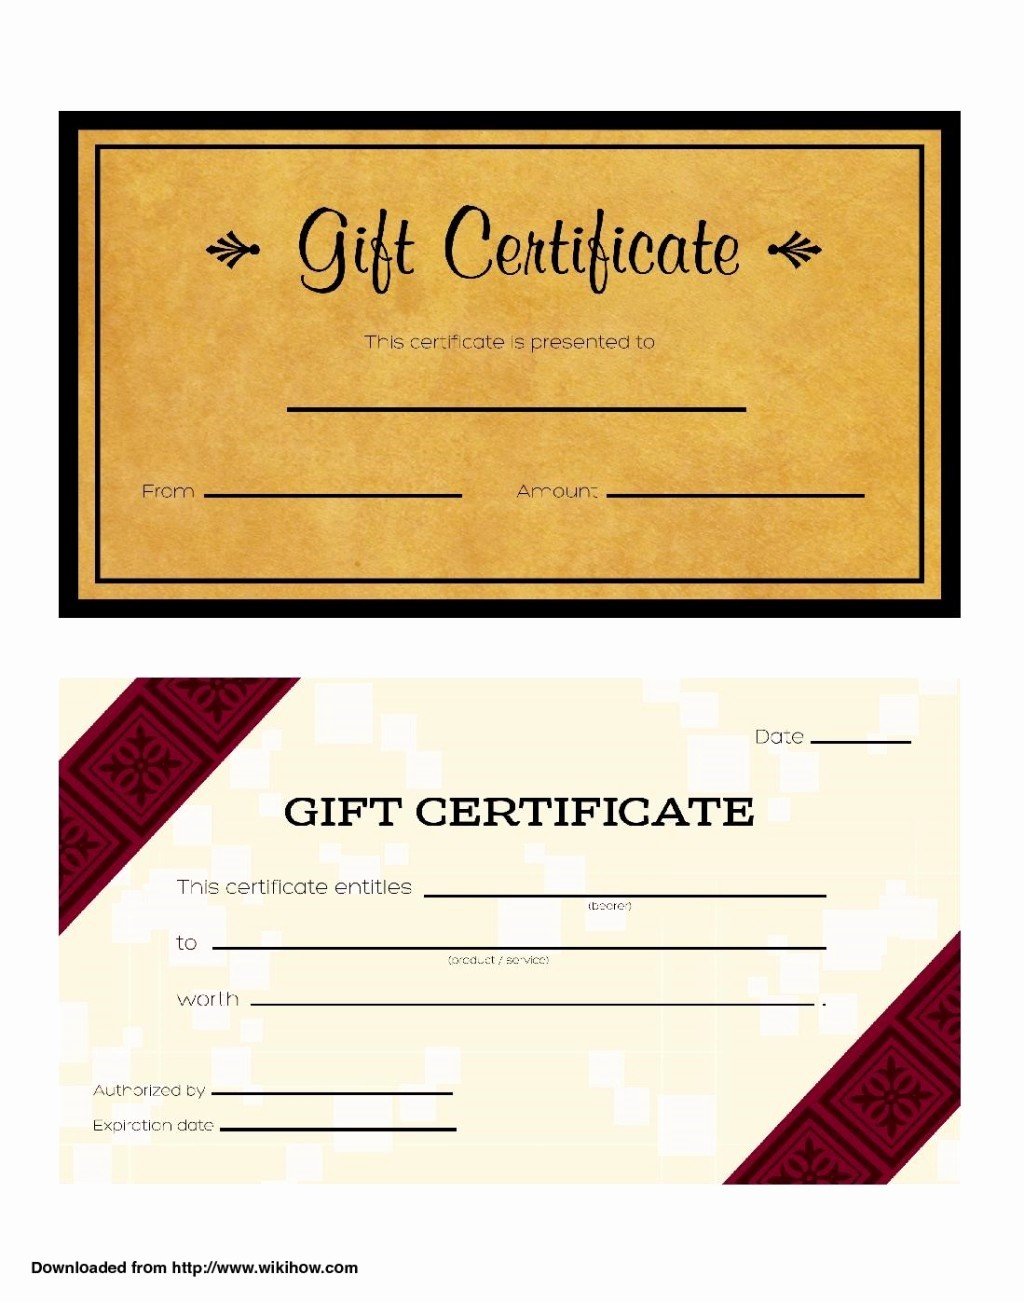 Making A Gift Certificate Free Fresh Cool Design Of Business Gift Certificate Template Brown